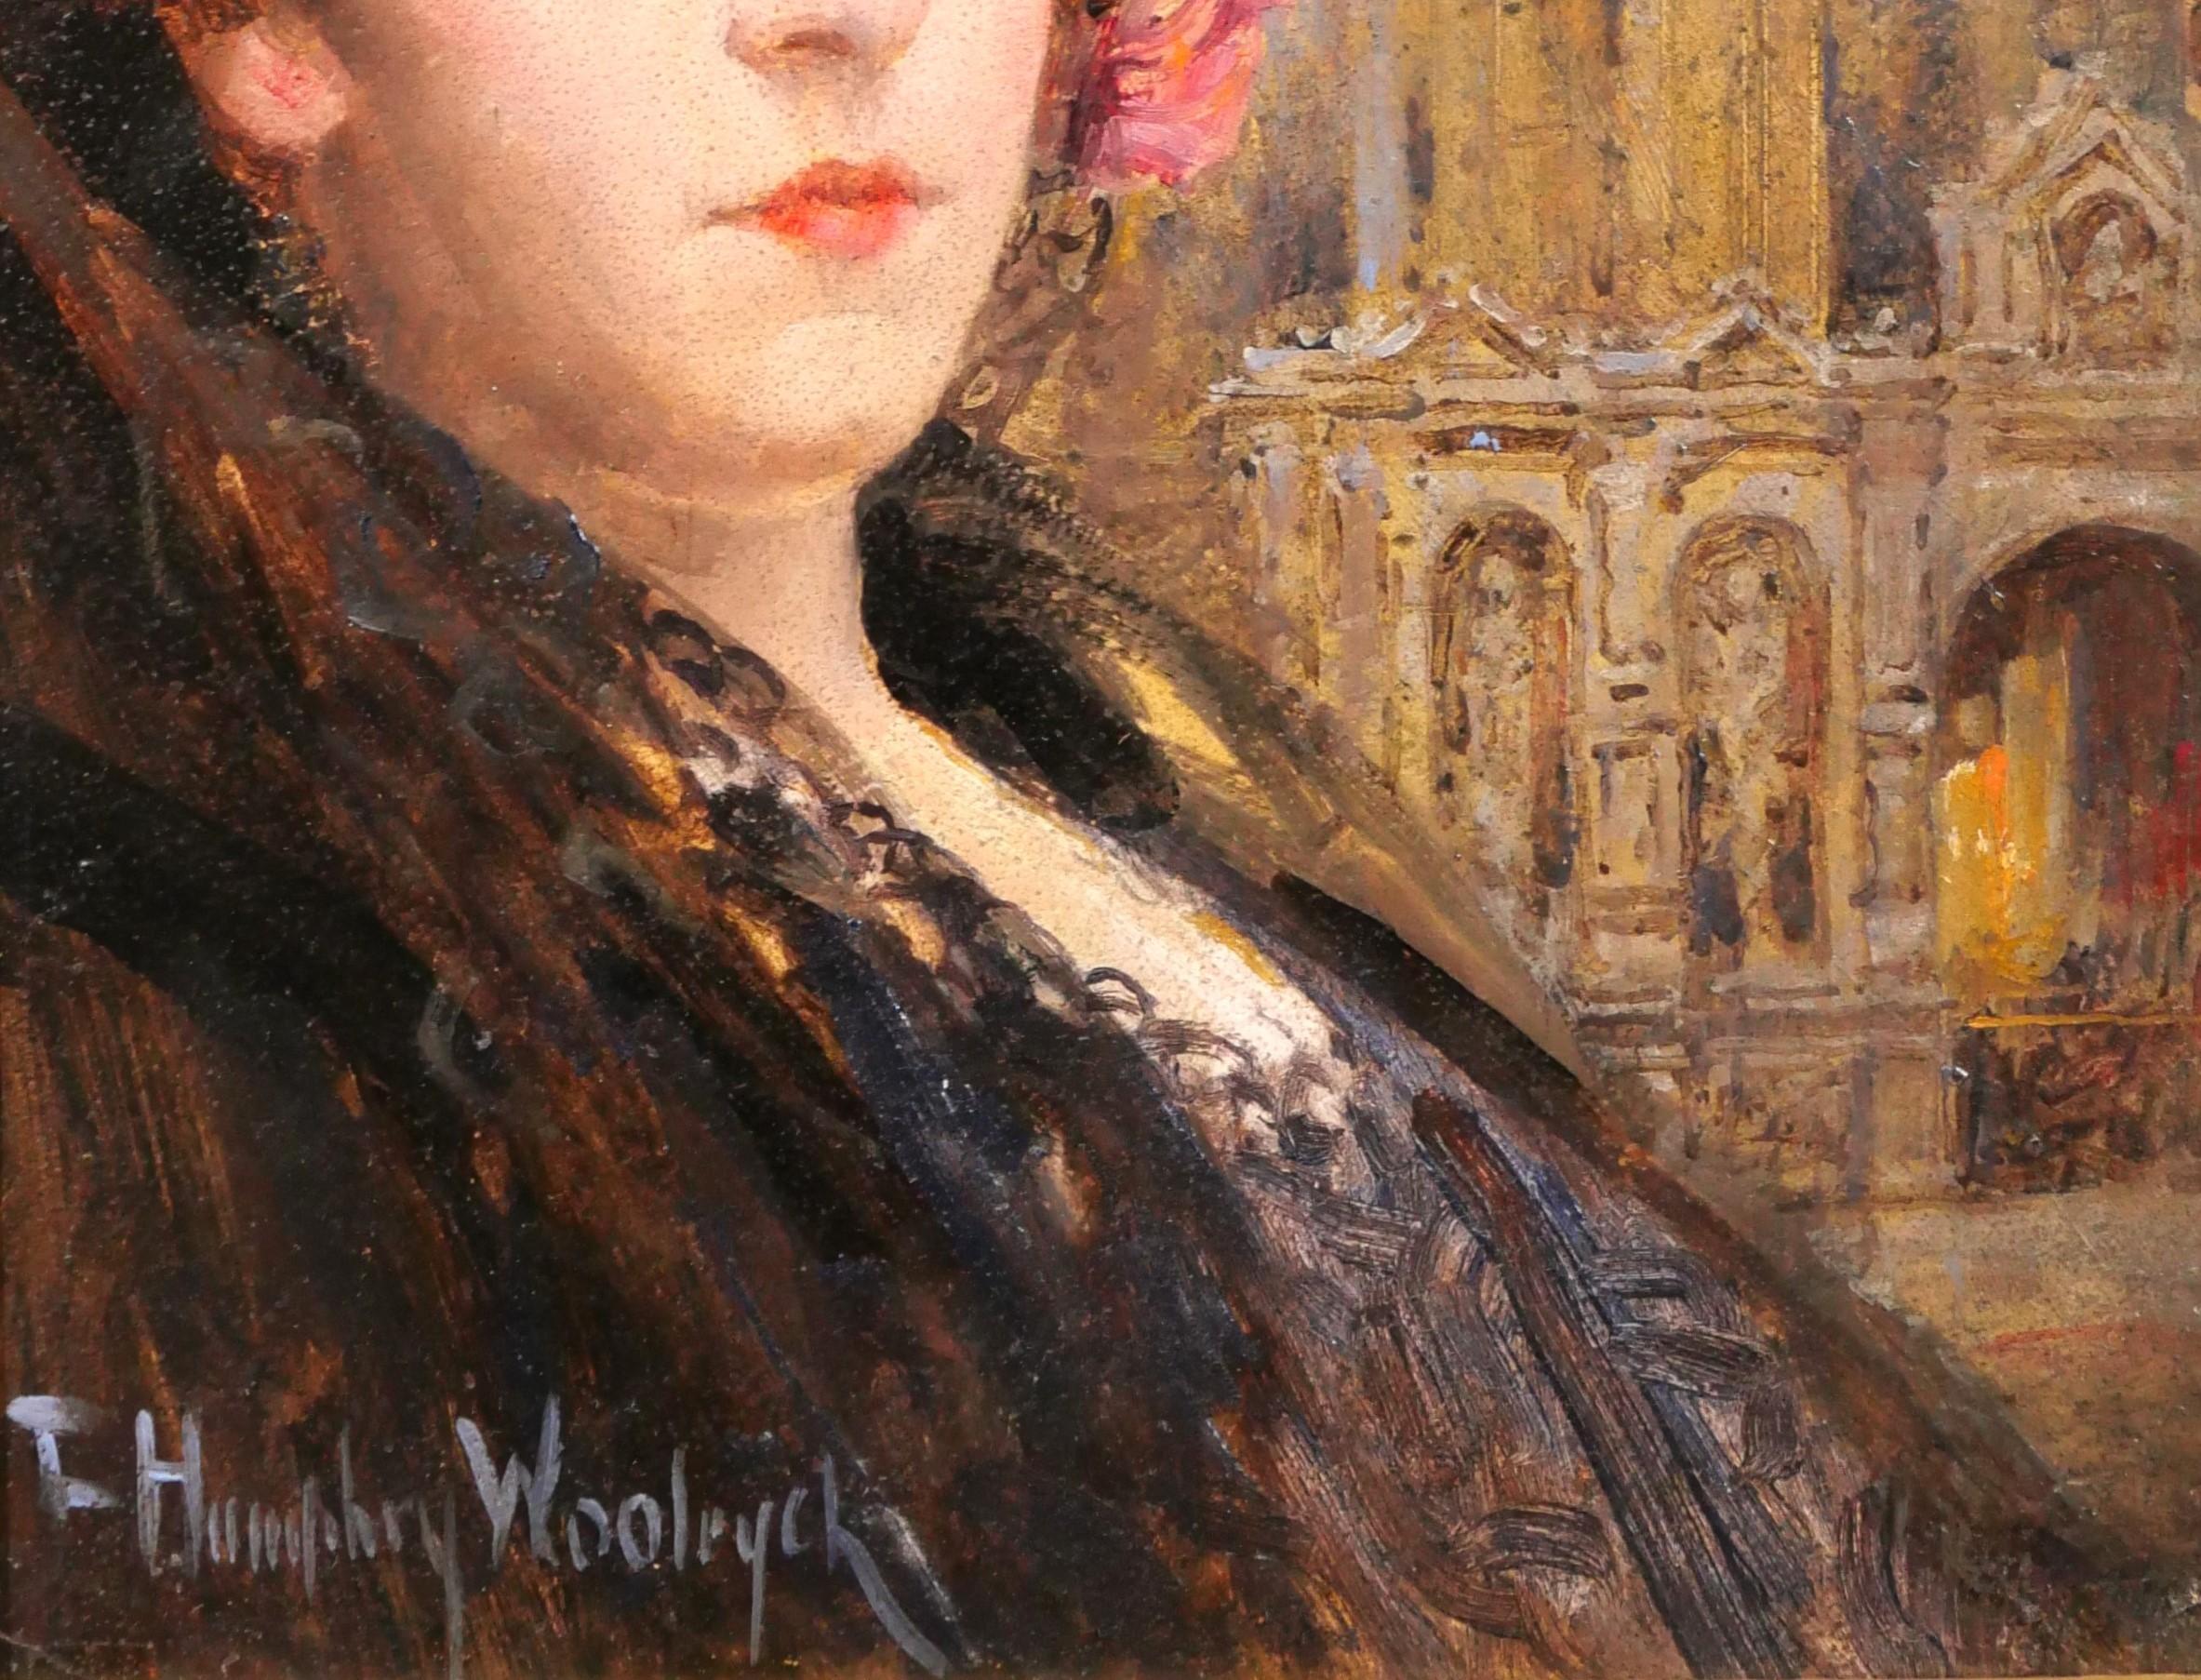 Francis Humphrey Woolrych
1868-1941, American
Portrait of a spanish woman in a church
Painting, oil on paper glued on hardboard
Signed
Painting: 25.5 x 32.5 cm (10 x 12.8 inches)
Frame: 34 x 40.5 cm (13.4 x 15.9 inches)
Good condition
Circa 1900